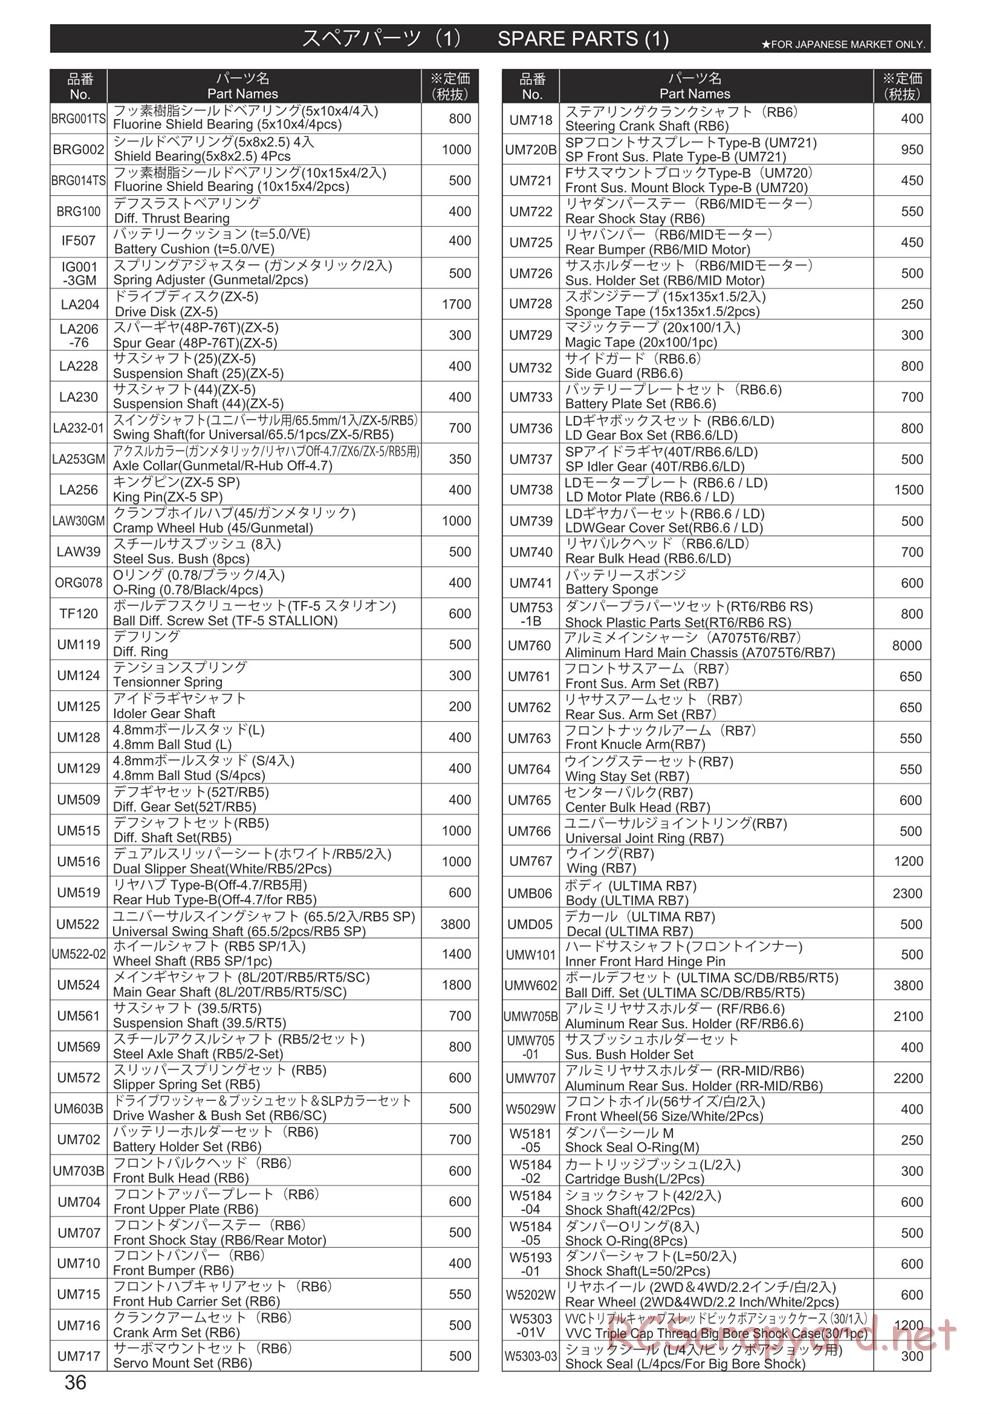 Kyosho - Ultima RB7 - Parts List - Page 1